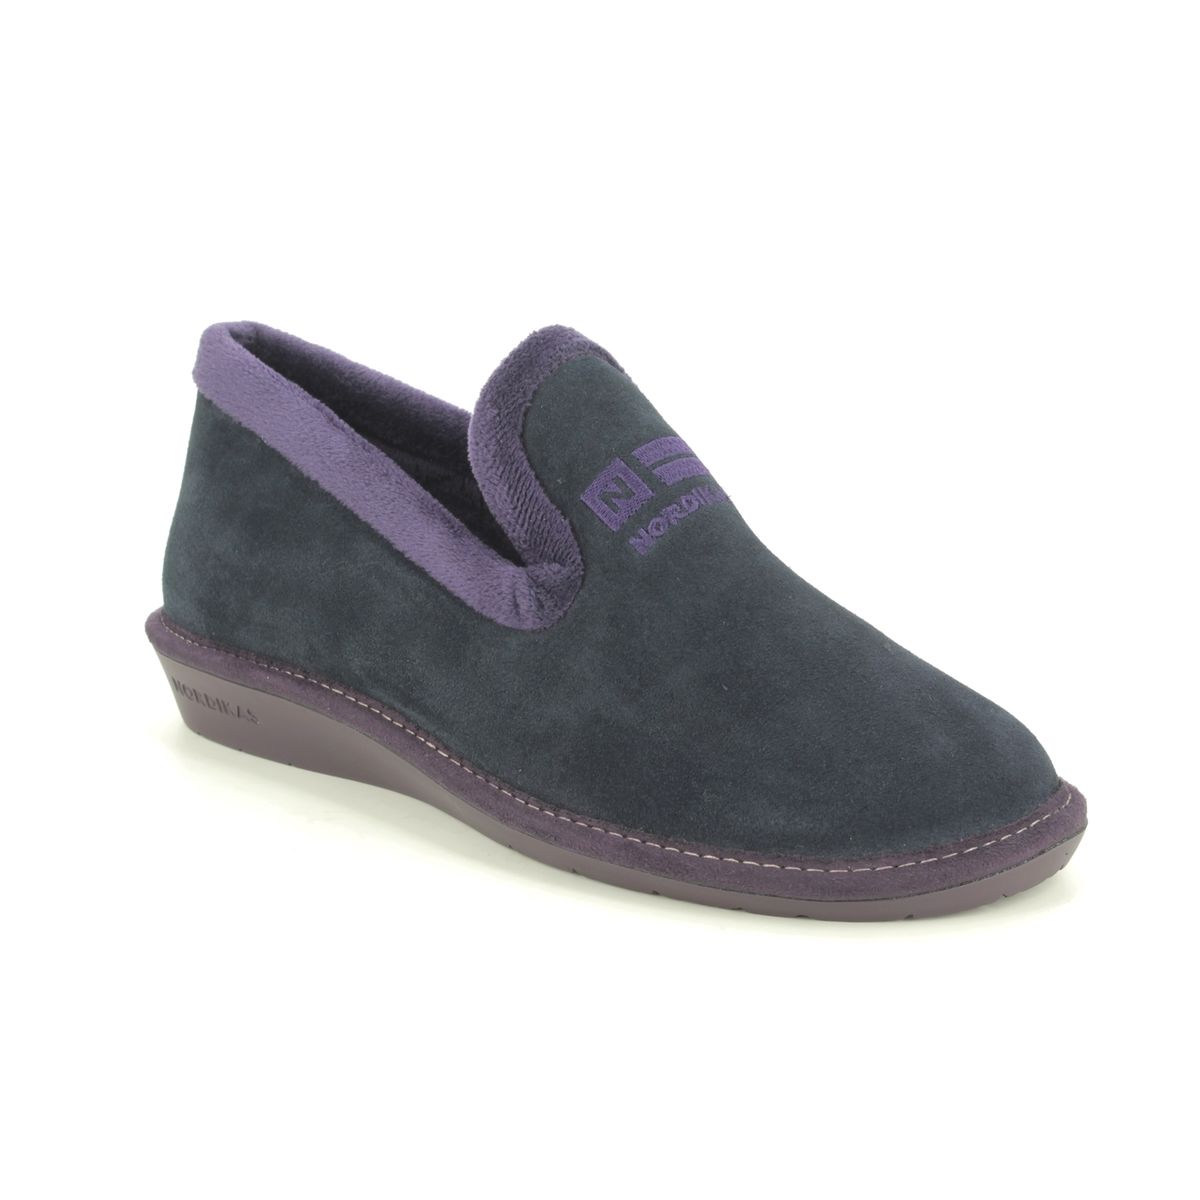 Nordikas Tabackin Navy Suede Womens Slippers 305-4   Nicola 3 In Size 40 In Plain Navy Suede